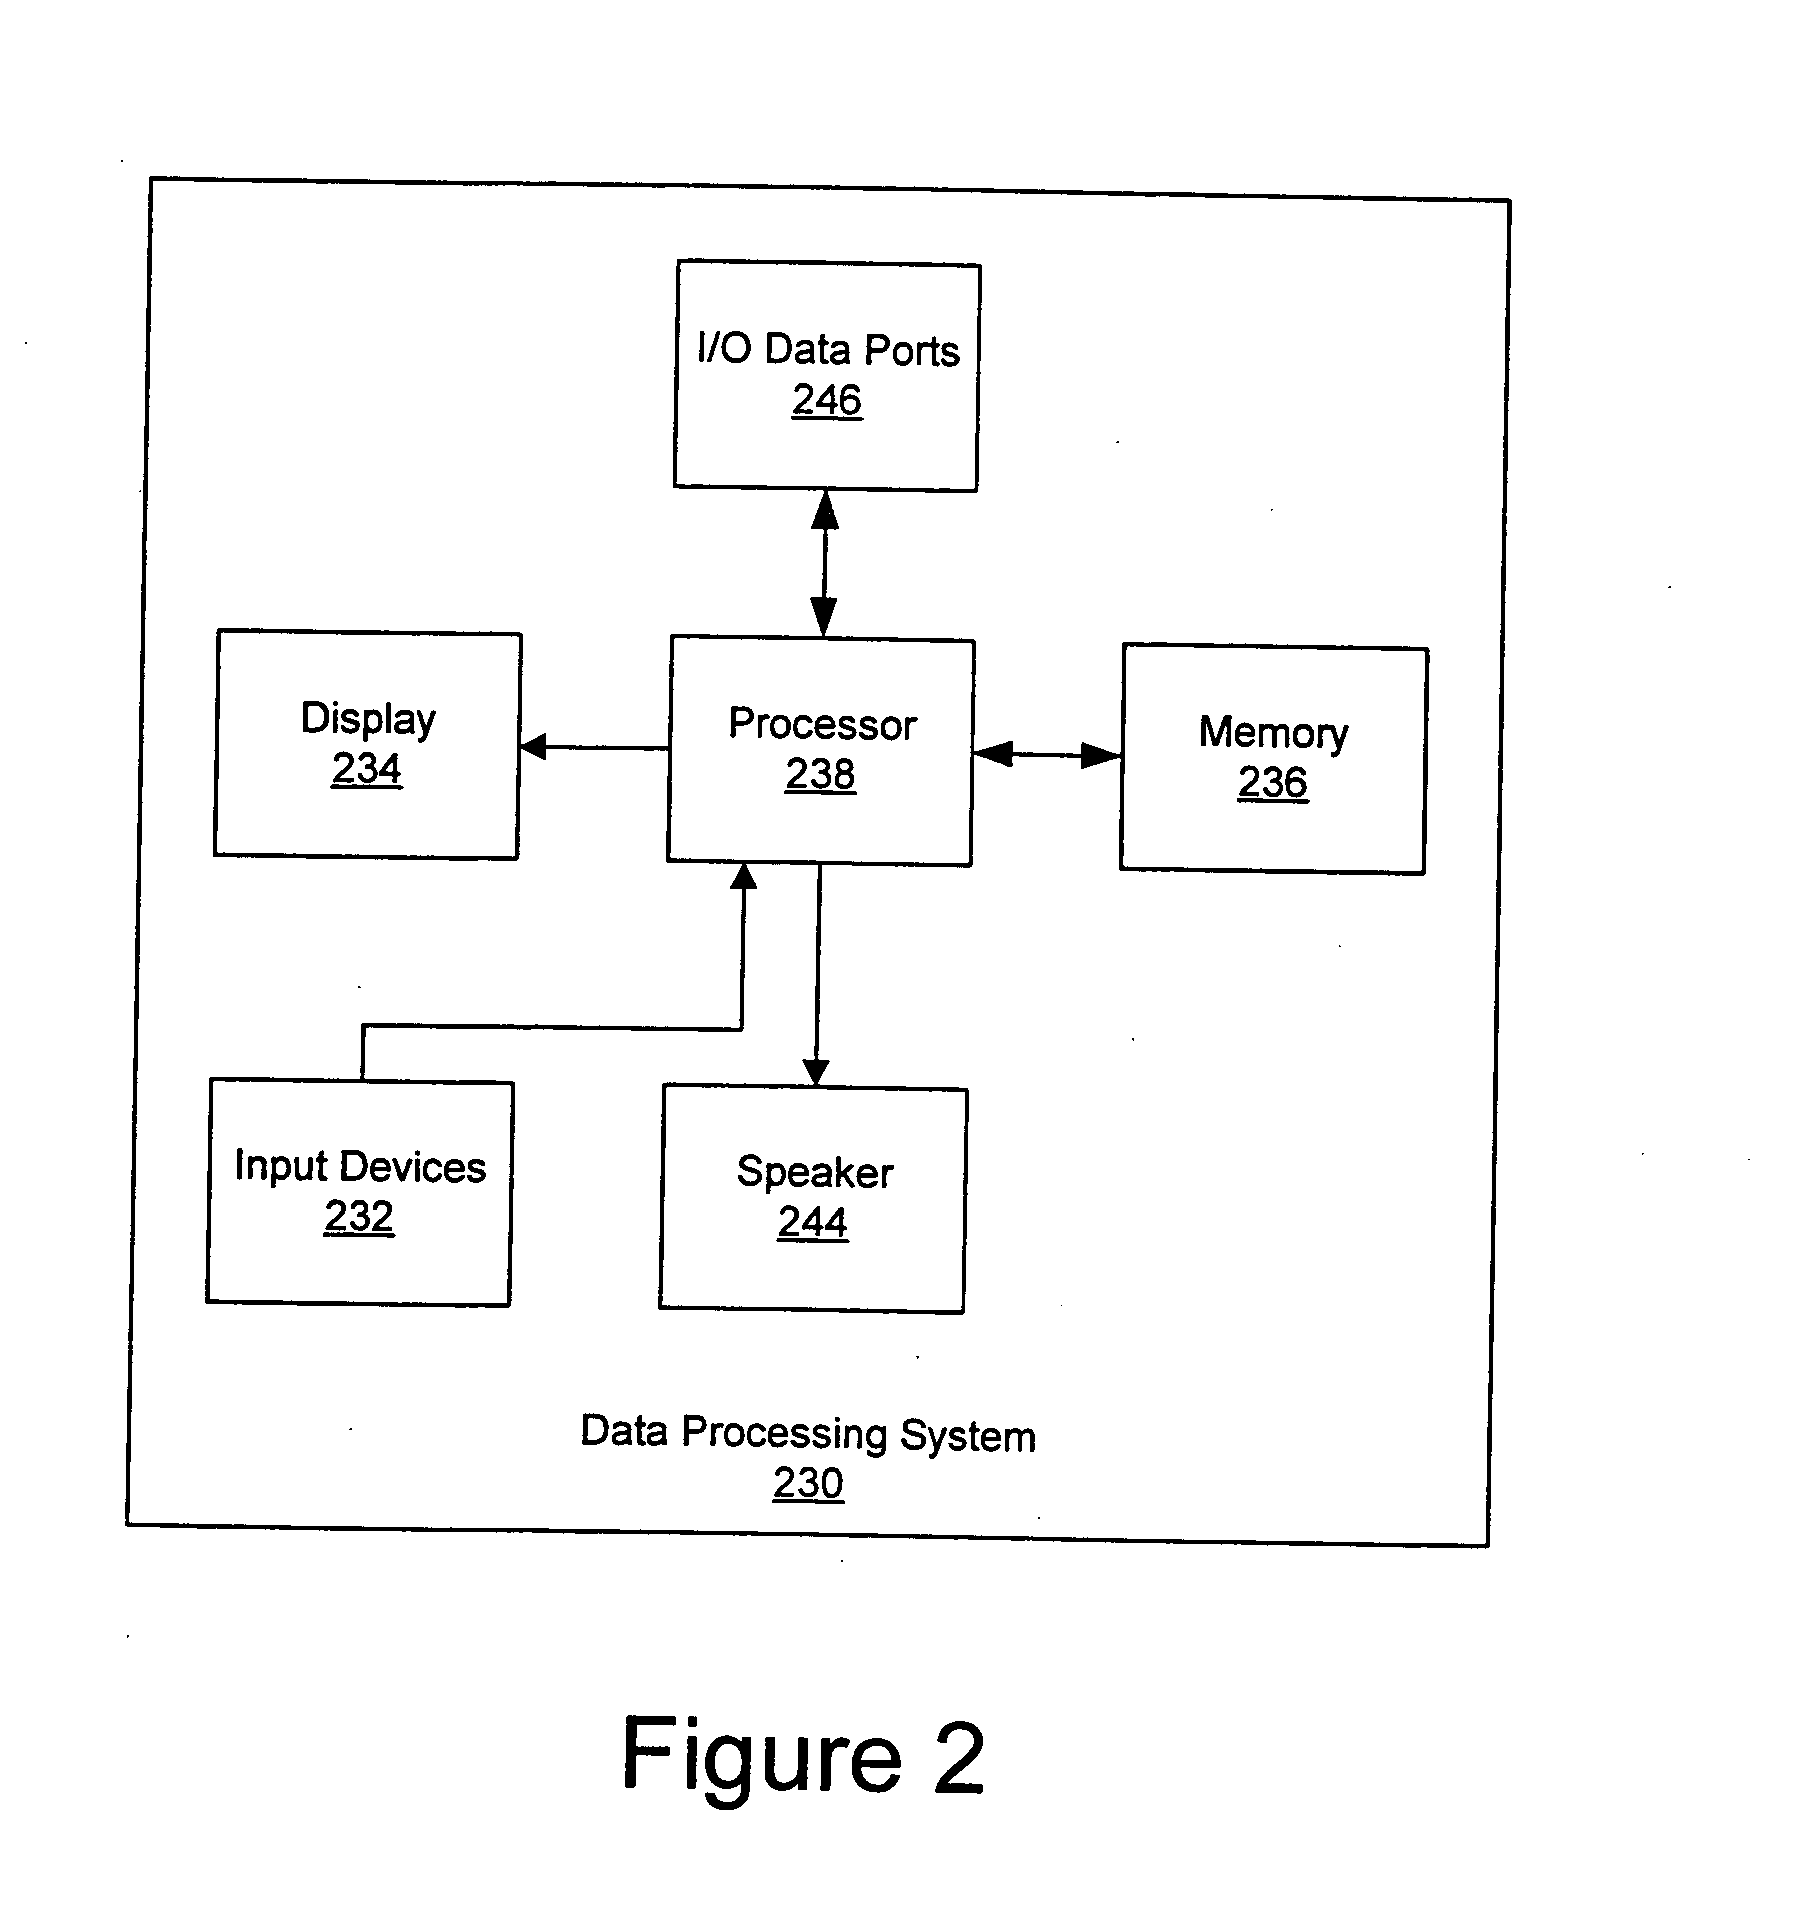 Methods, systems and computer program products for providing status information to a device attached to an information infrastructure